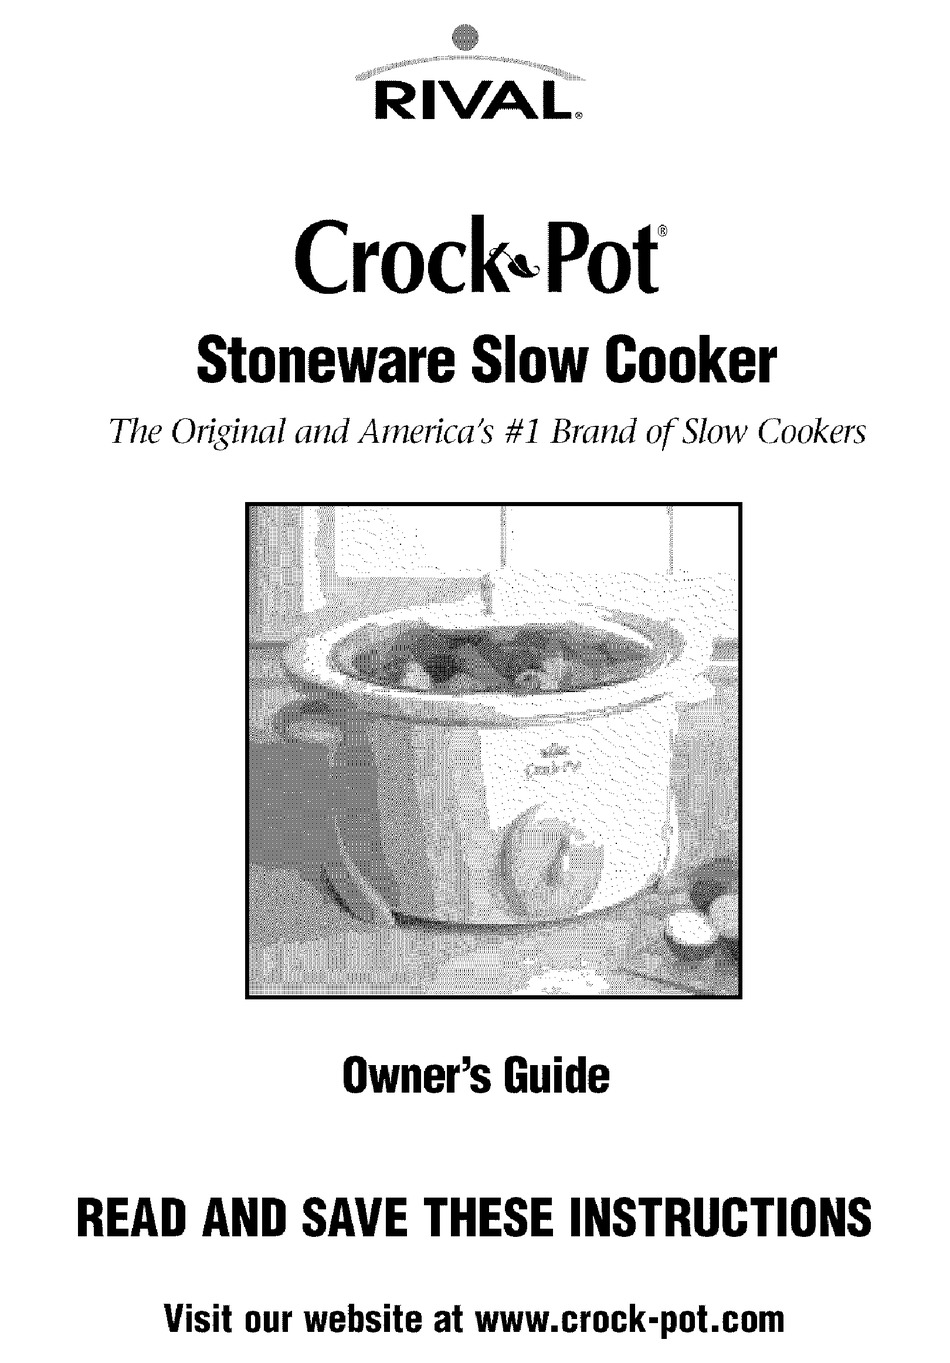 Rival Crockpot Instruction Manual and Cook Book : Rival